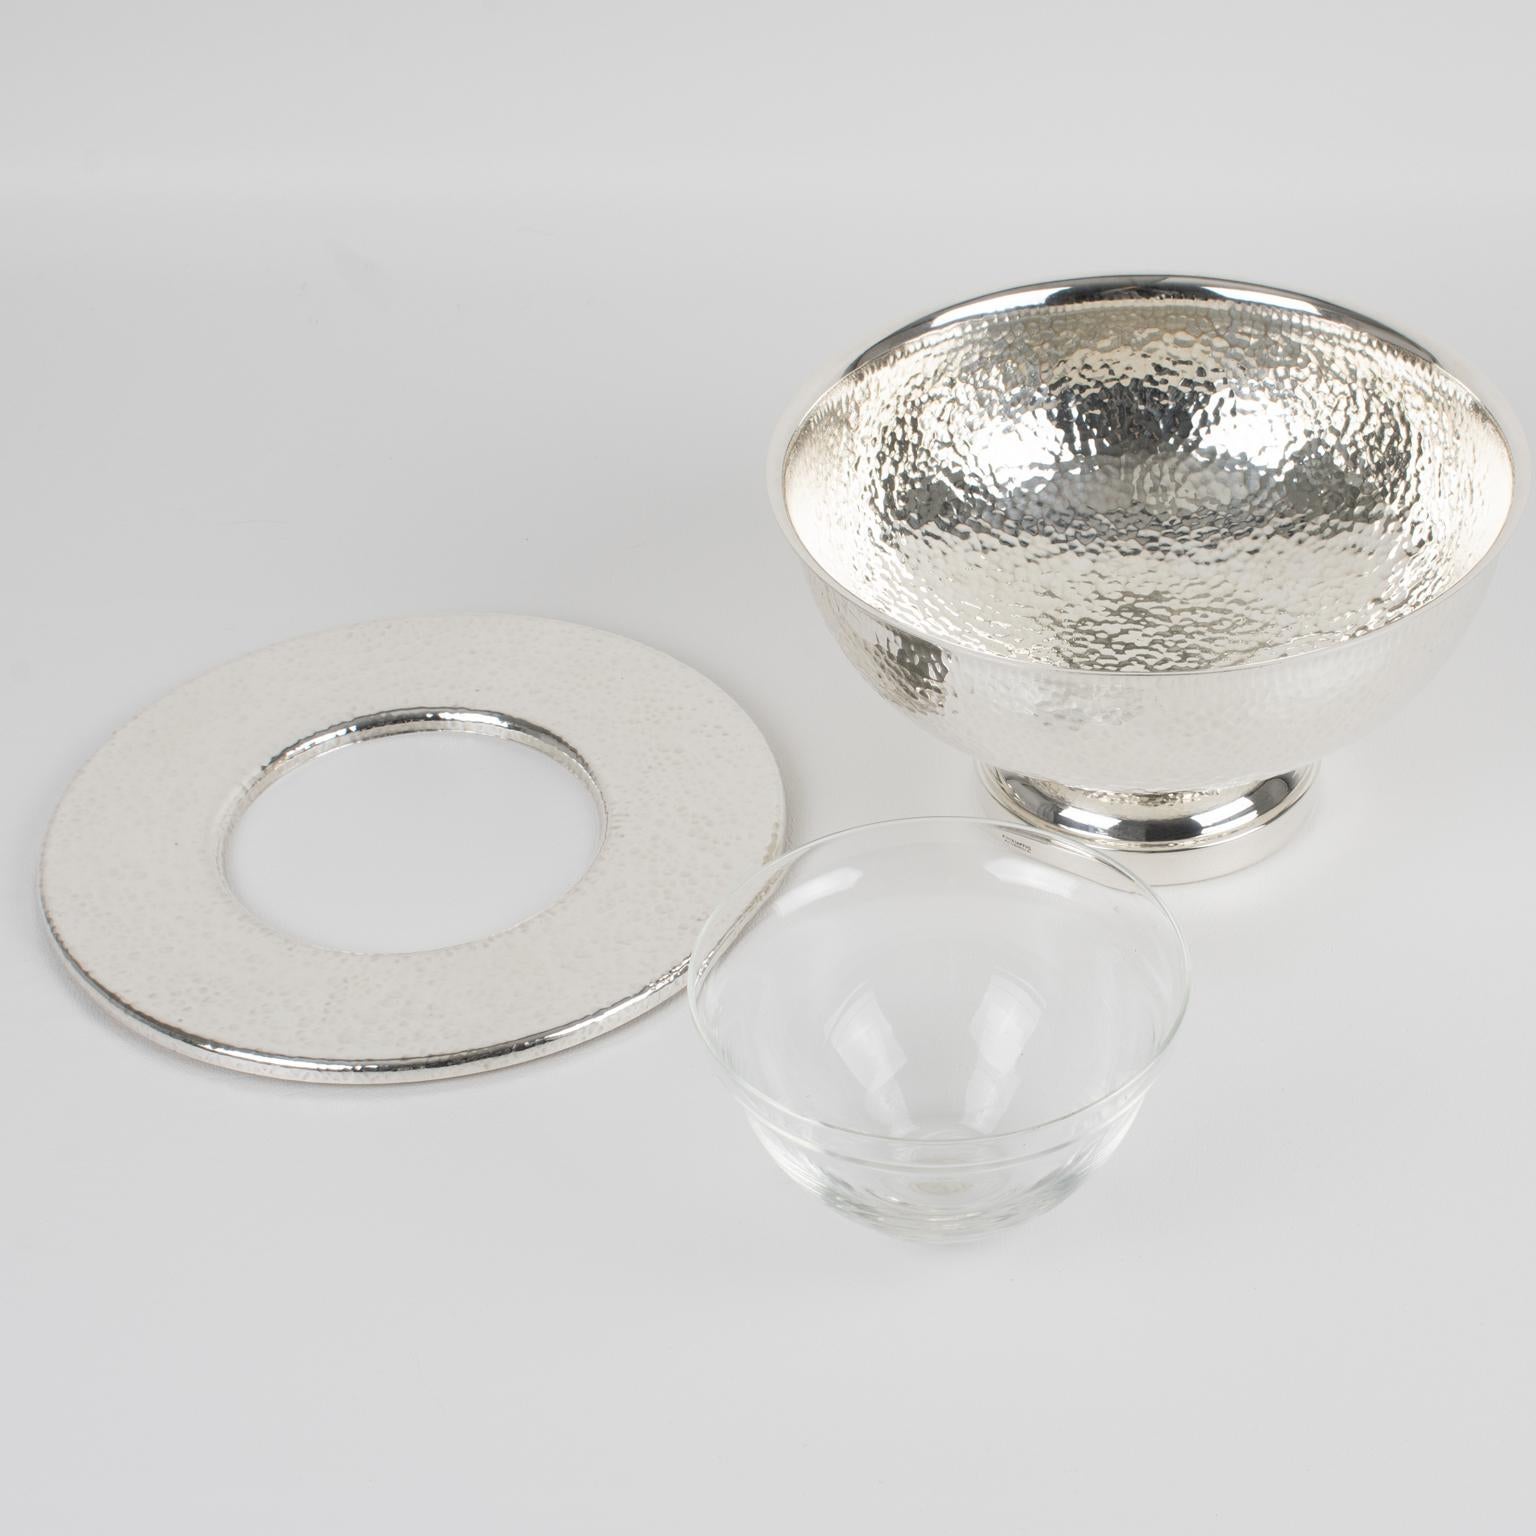 Modern Plata Lappas Argentina Silver Plate and Crystal Caviar Chiller Bowl Serving Set